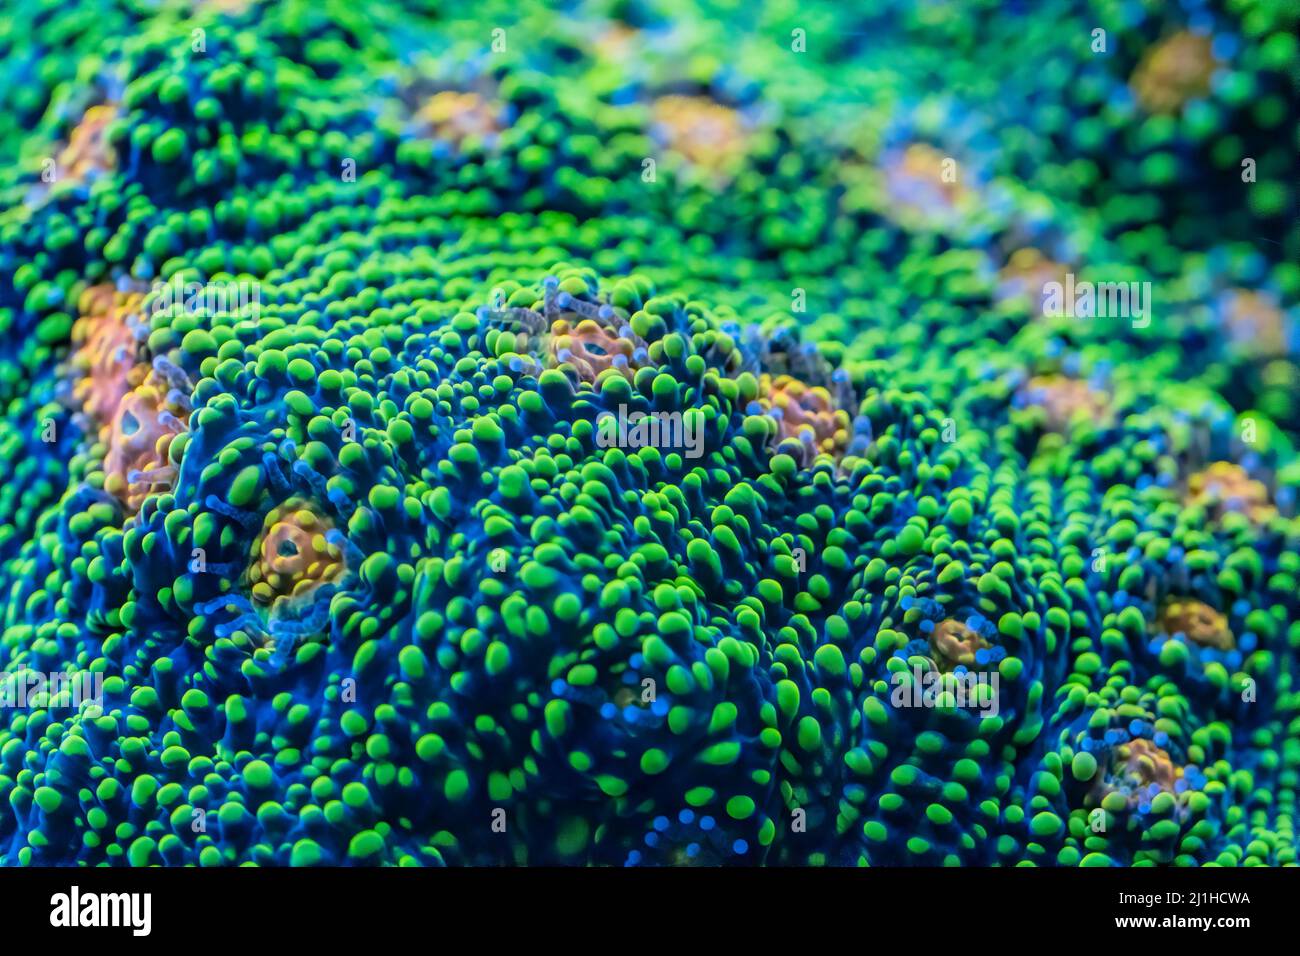 A macro photograph of a bubblegum chalice large polyp stony coral in a saltwater reef aquarium Stock Photo